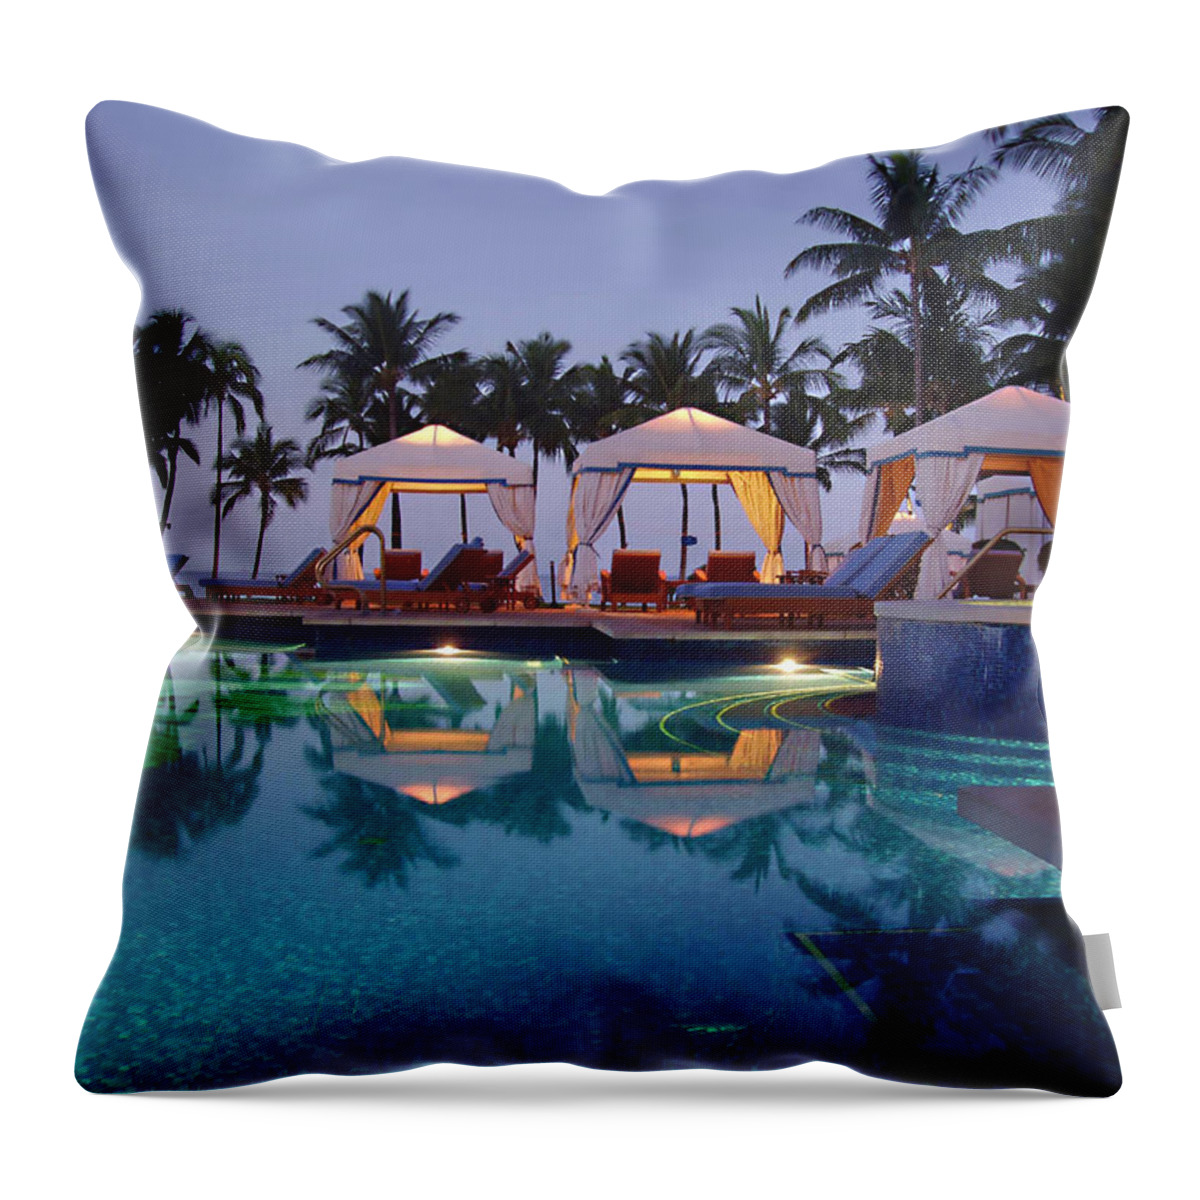 Poolside At Dawn Throw Pillow featuring the photograph Poolside at Dawn by Ellen Henneke